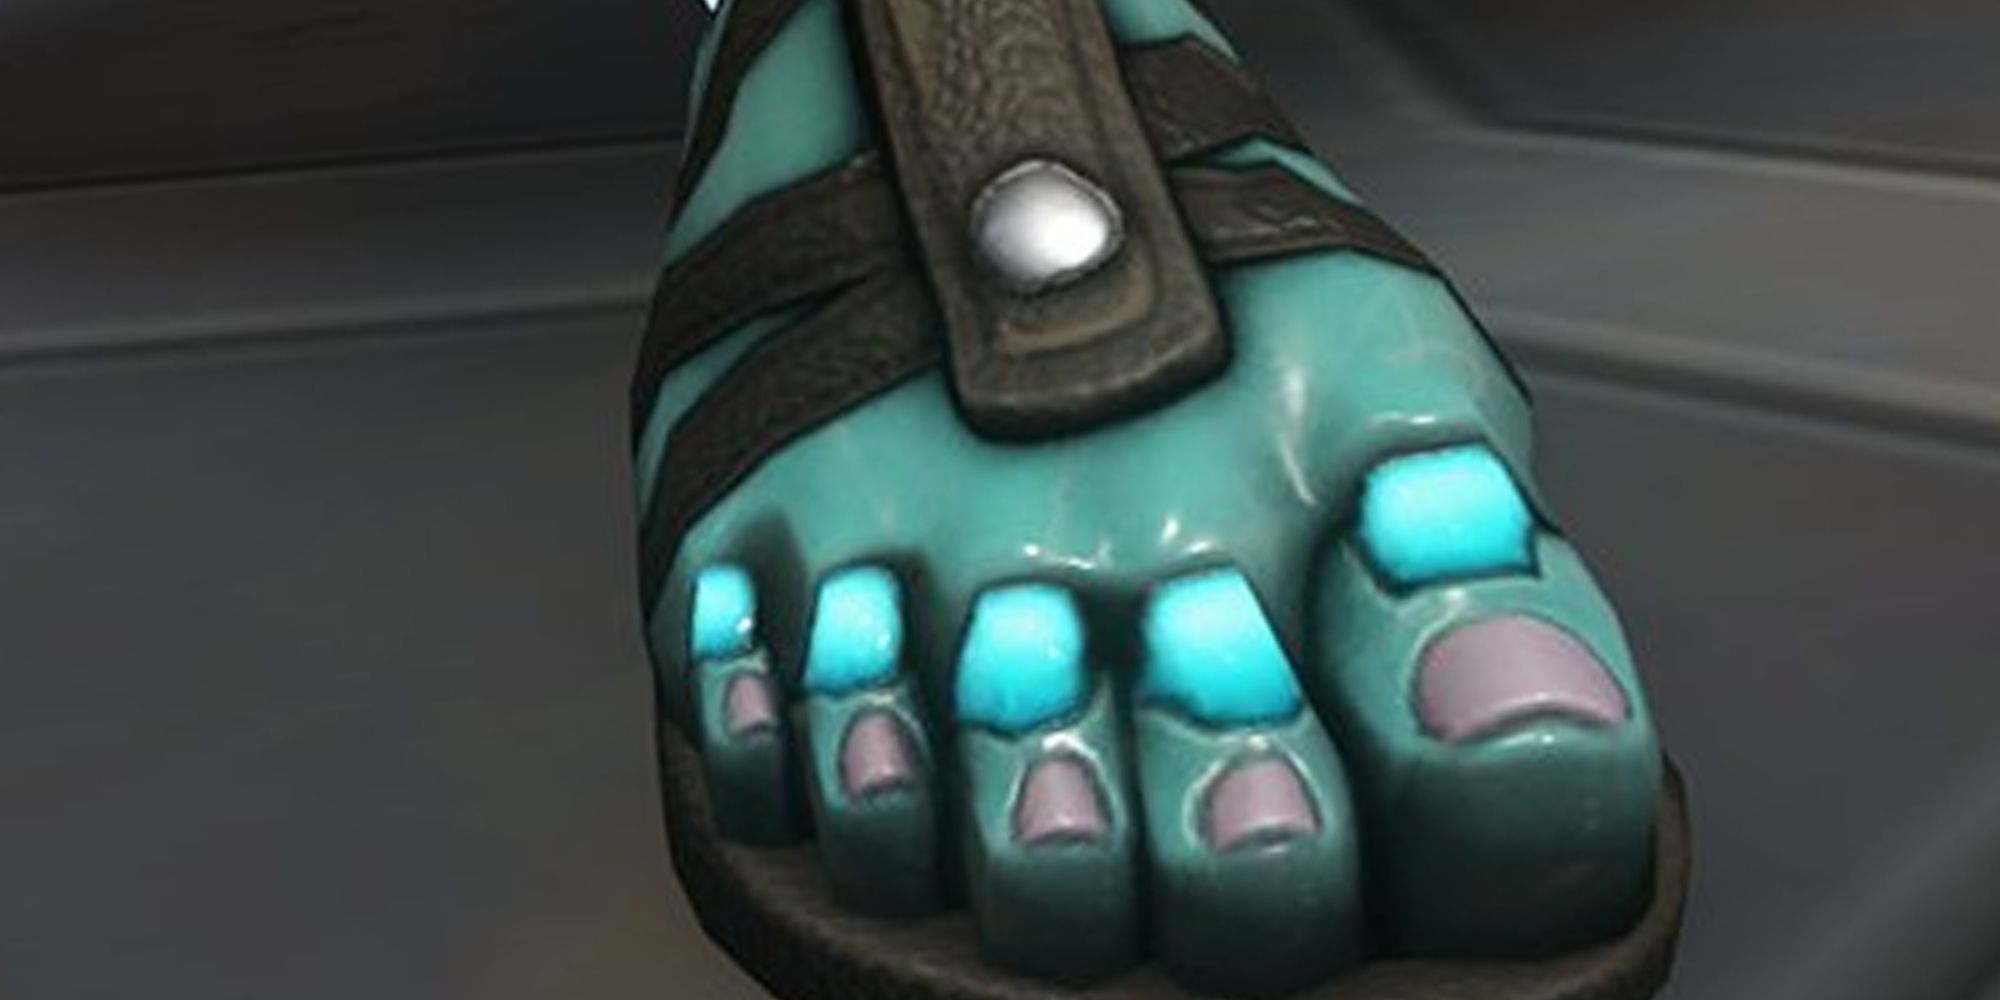 Overwatch 2 Ramattra Poseidon skin, zoomed in shot of his blue foot in a sandal